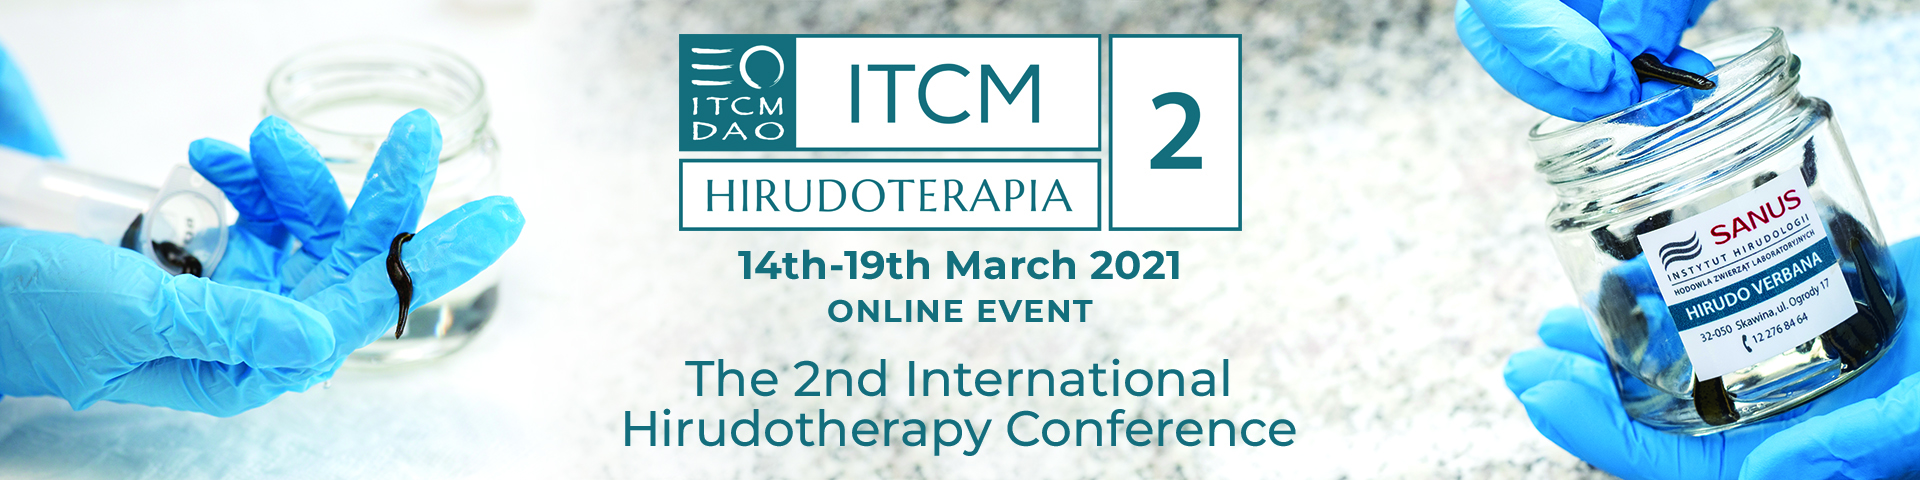 The 2nd International Hirudotherapy Conference